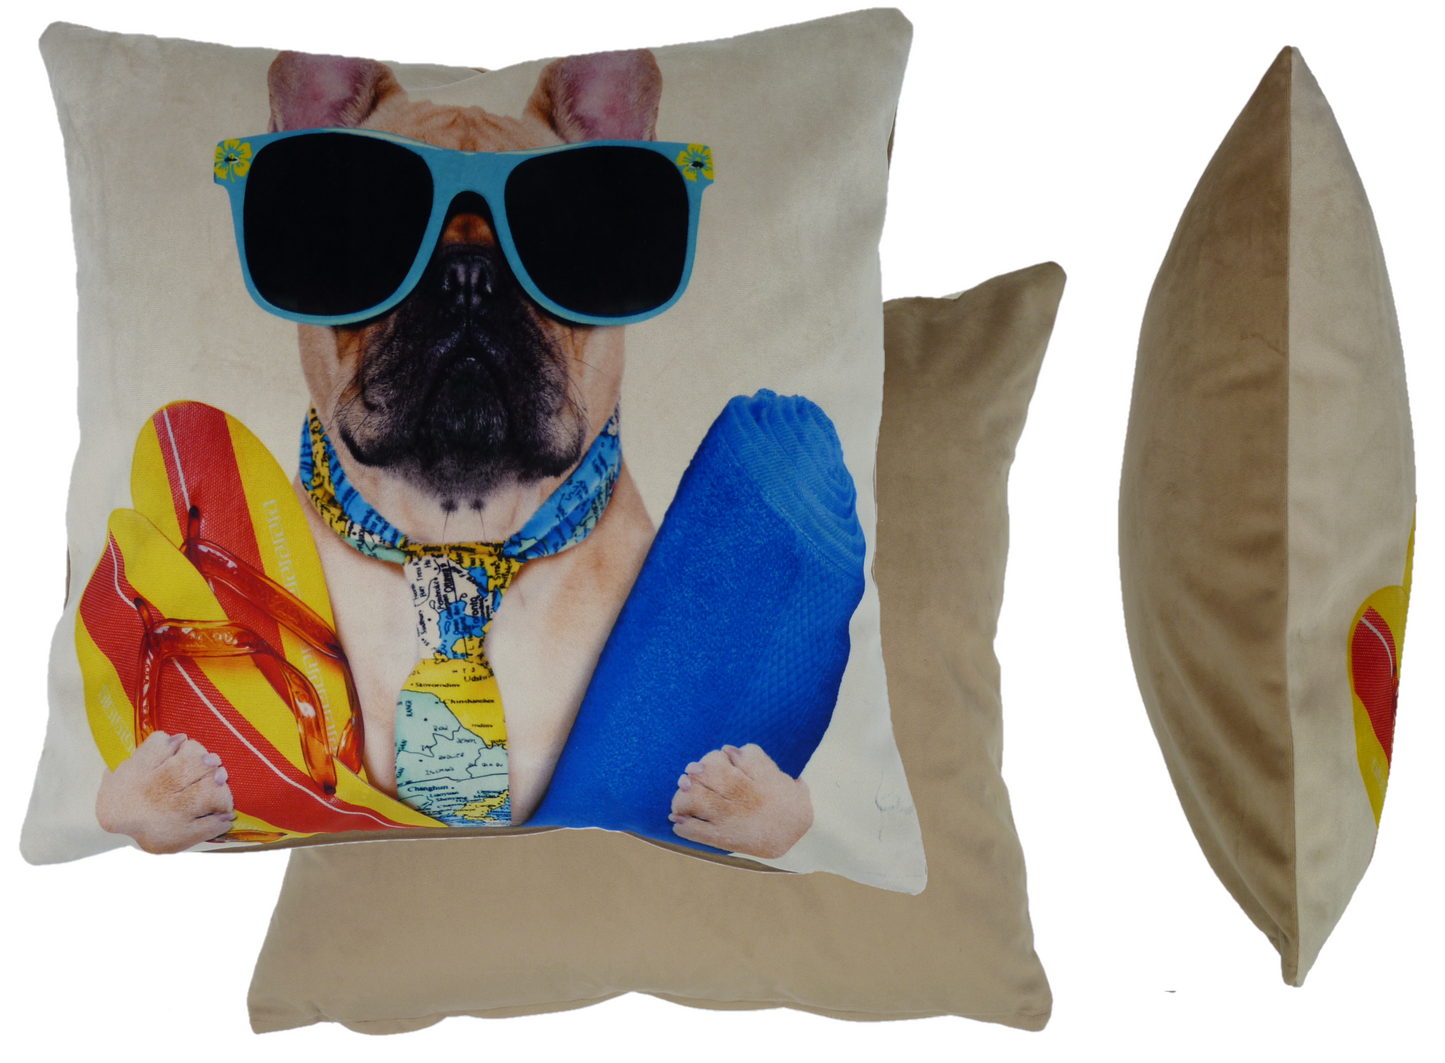 Frenchy Surf Dog Colourful Cushion Cover